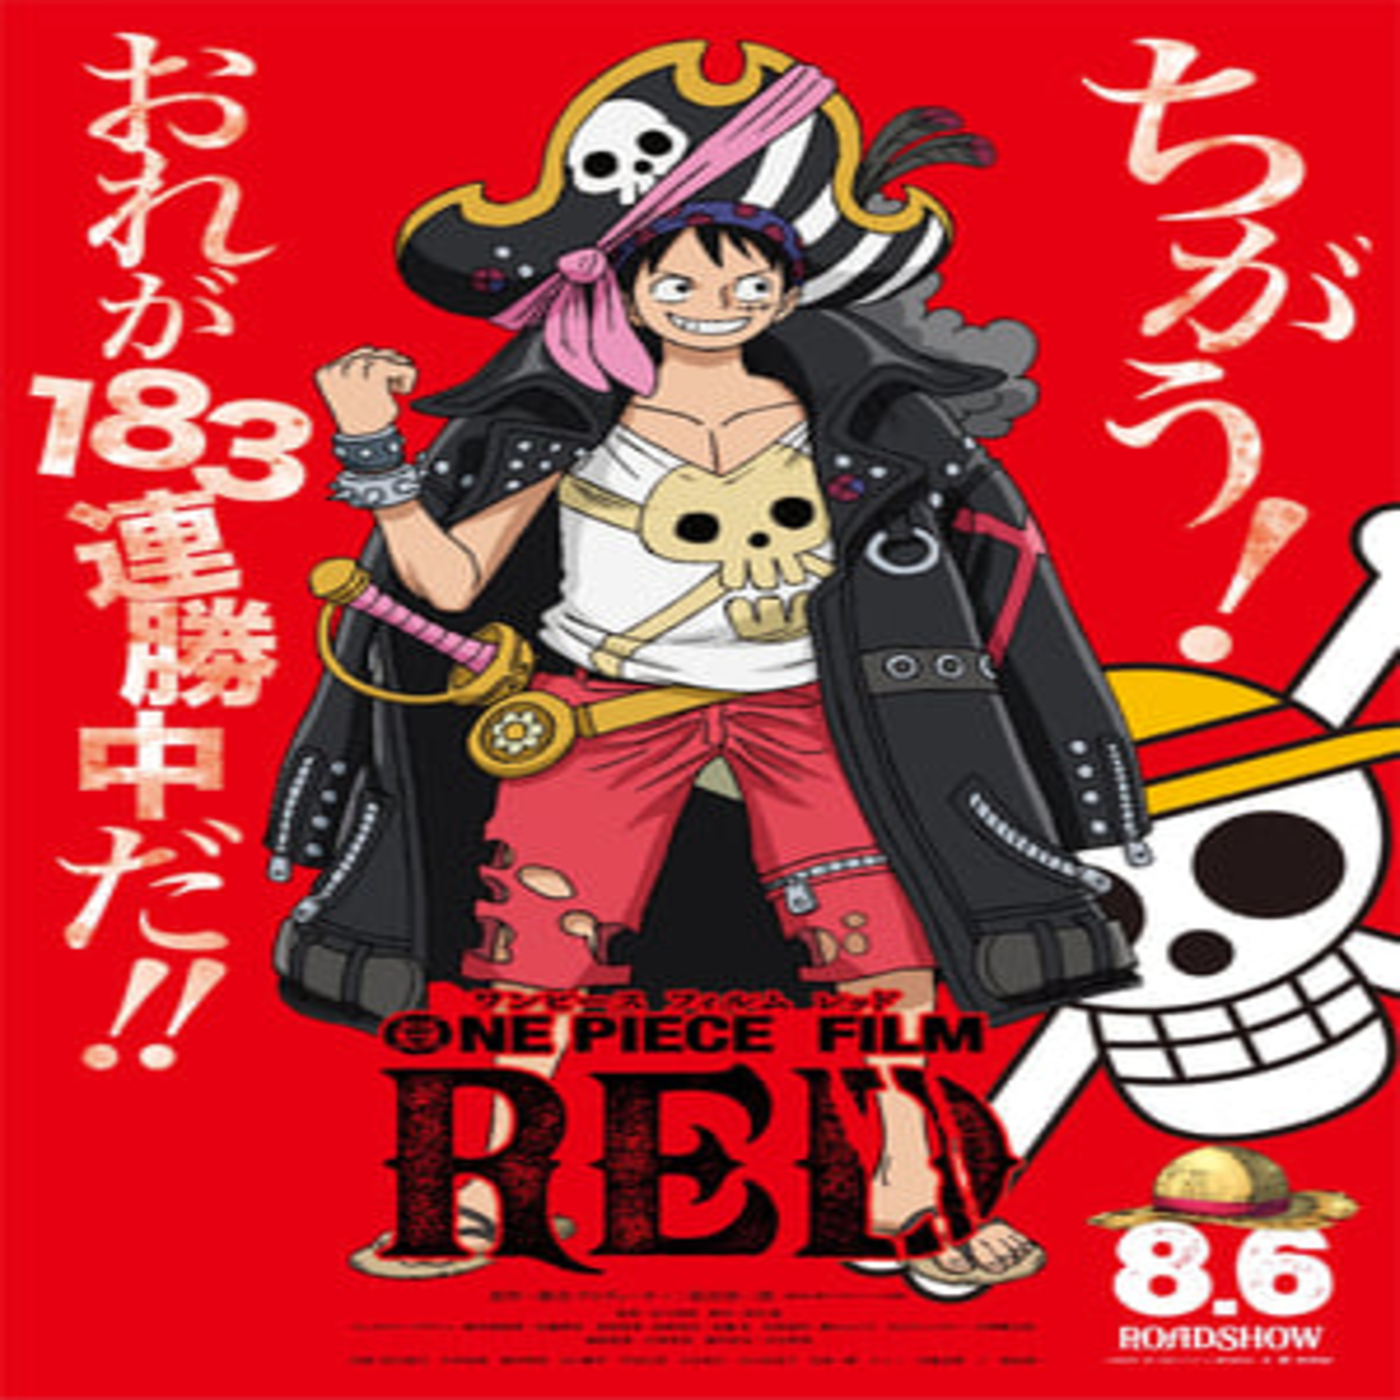 Assistir One Piece Online completo